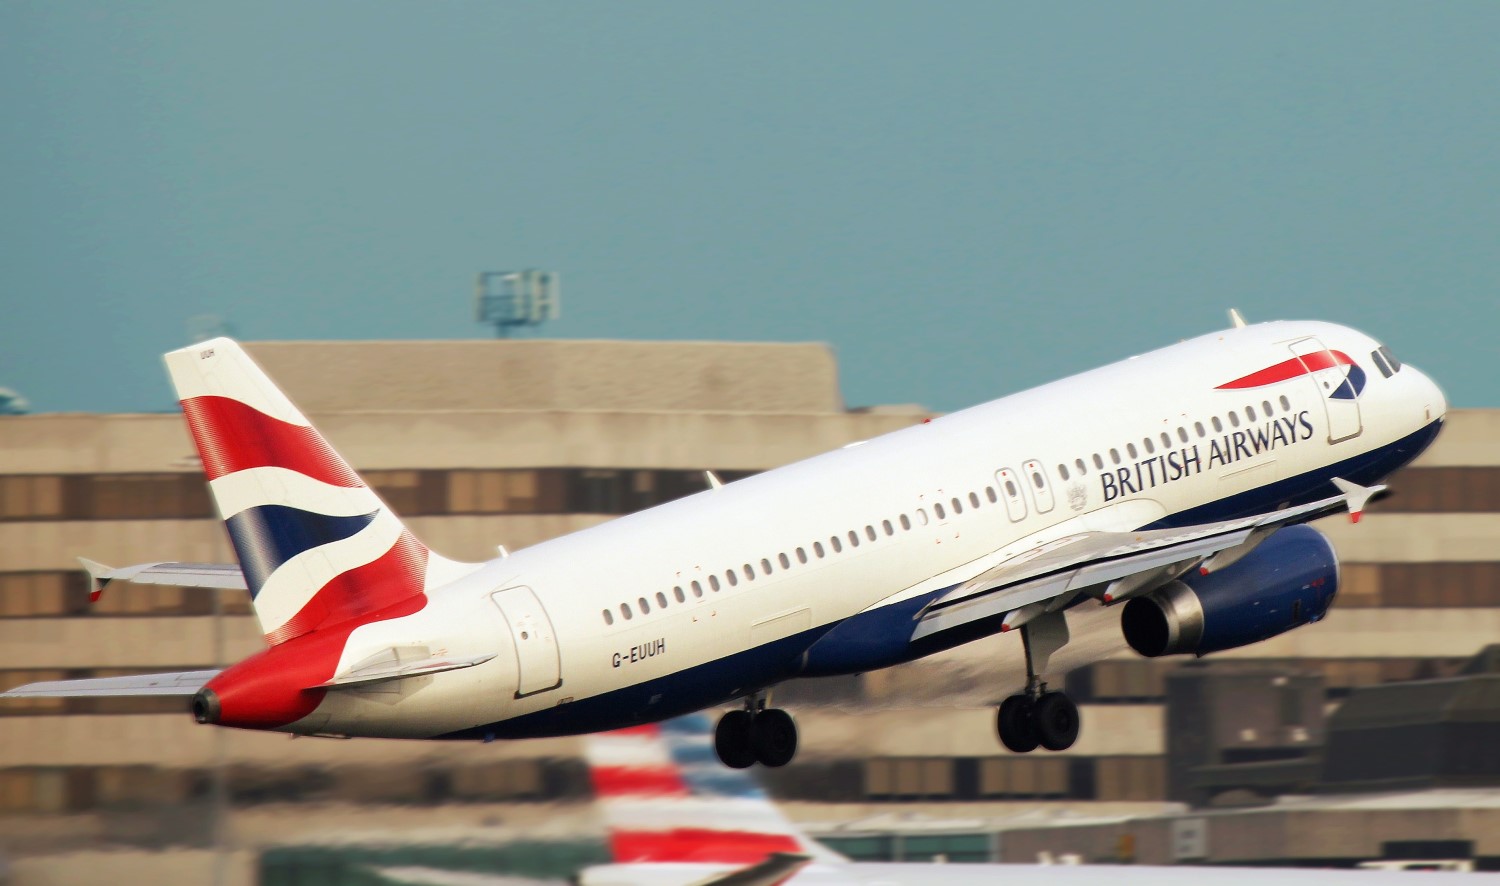 Brexit’s consecuences for airlines